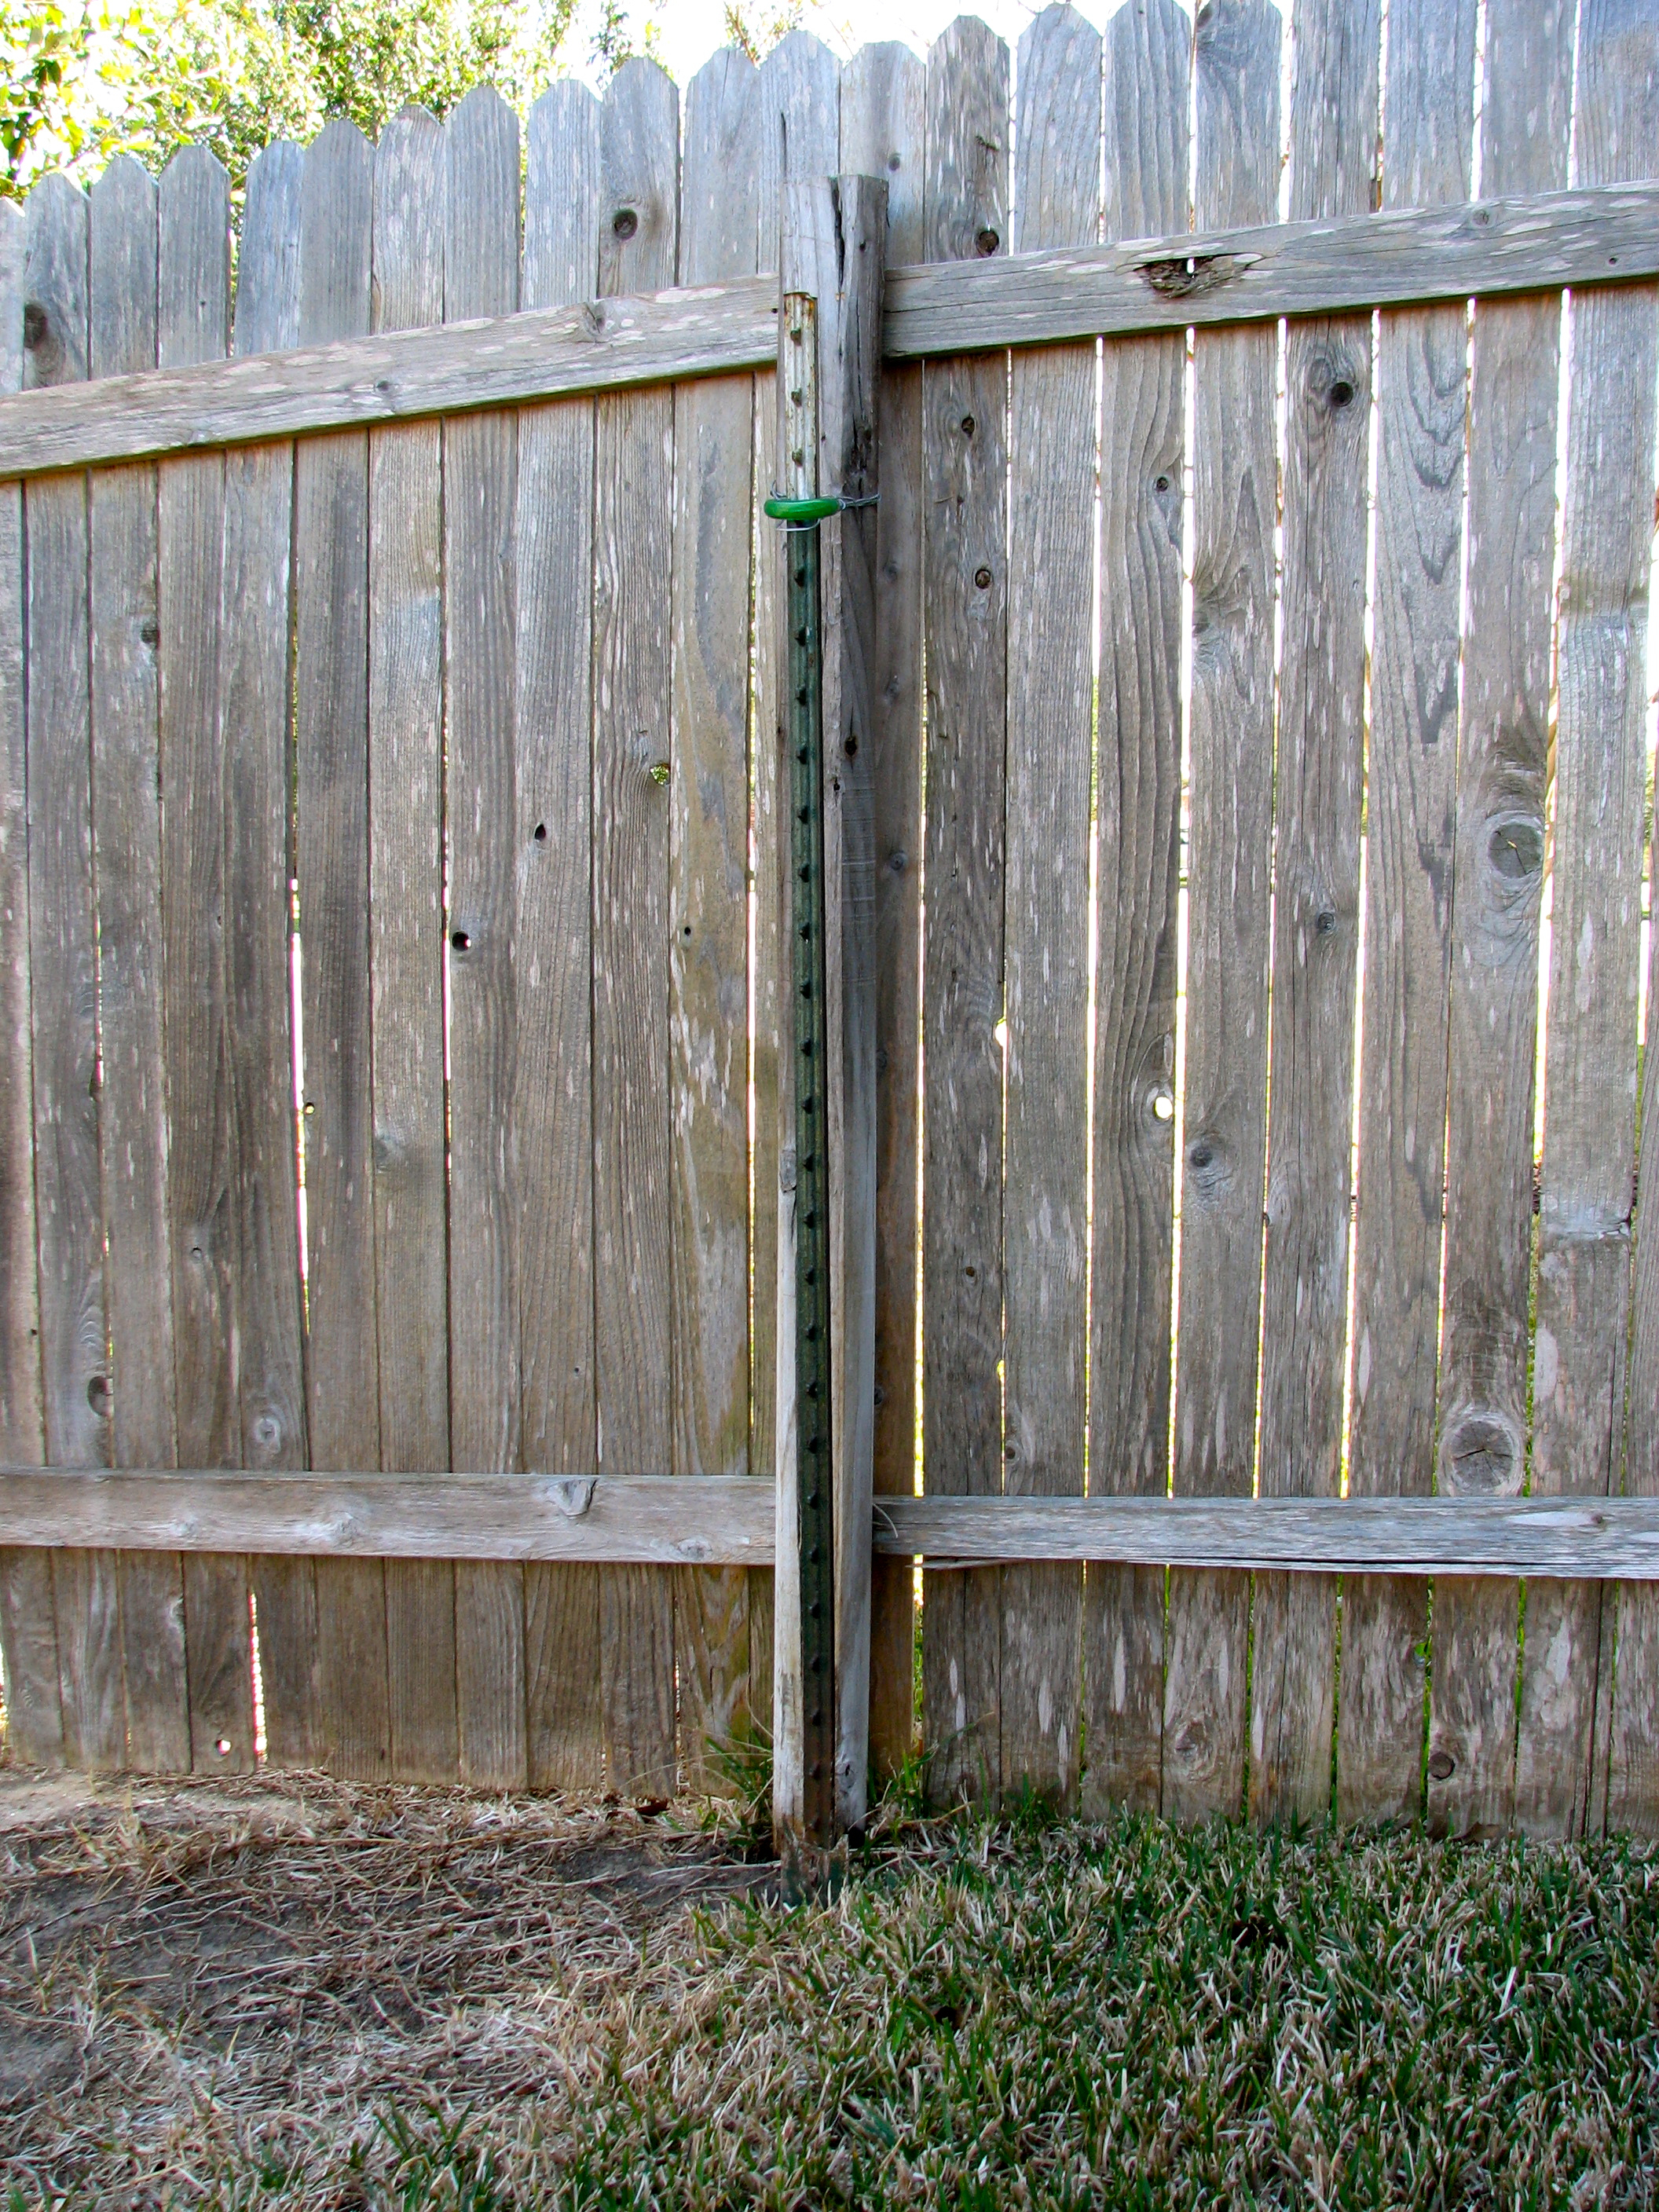 Temporary Fixes For A Broken Fence Post On Your Privacy Fence regarding dimensions 2112 X 2816